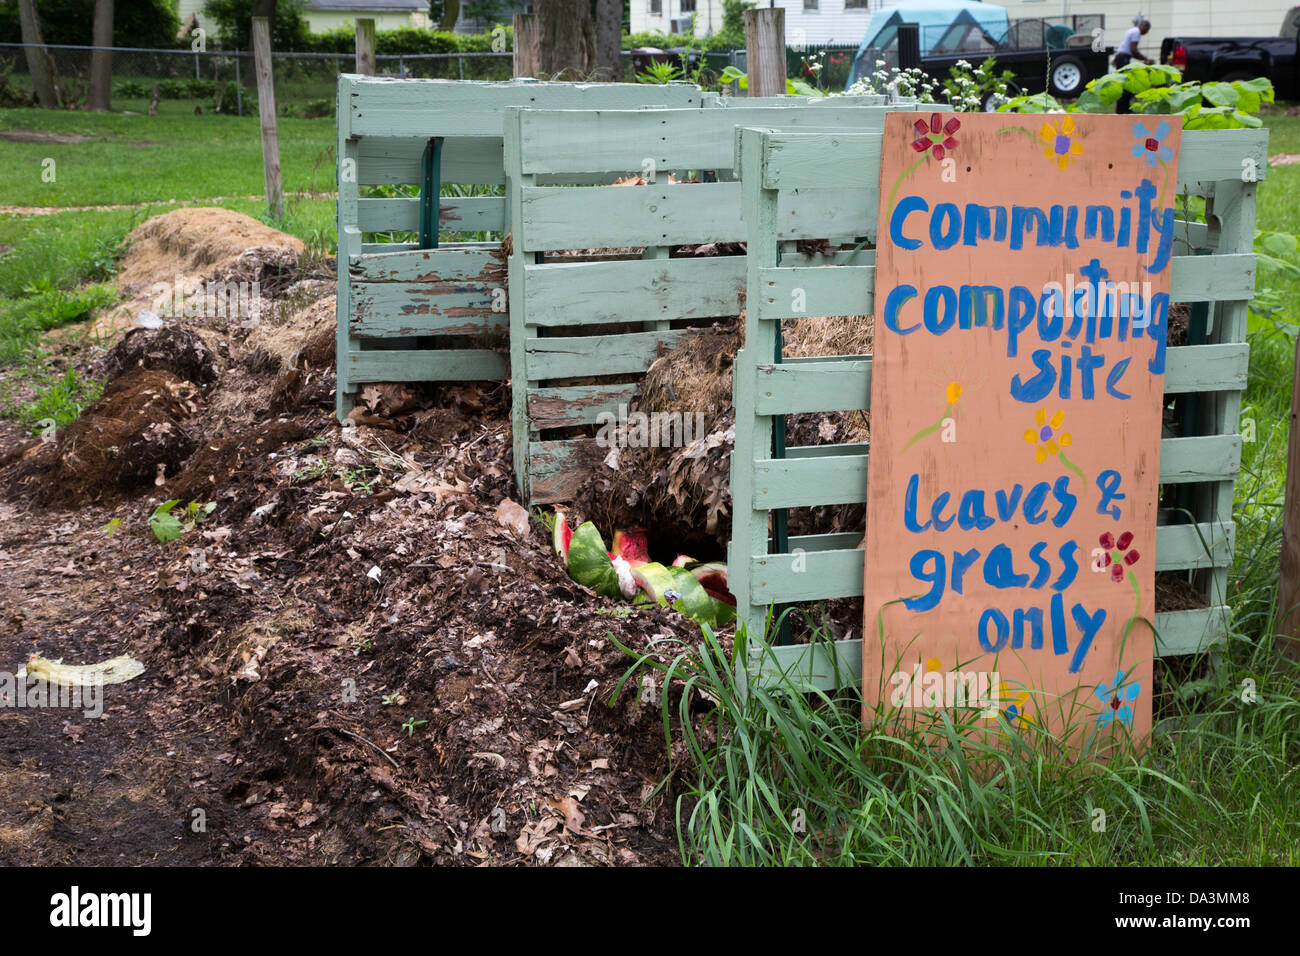 A community composting site in the Brightmoor neighborhood of Detroit. Stock Photo